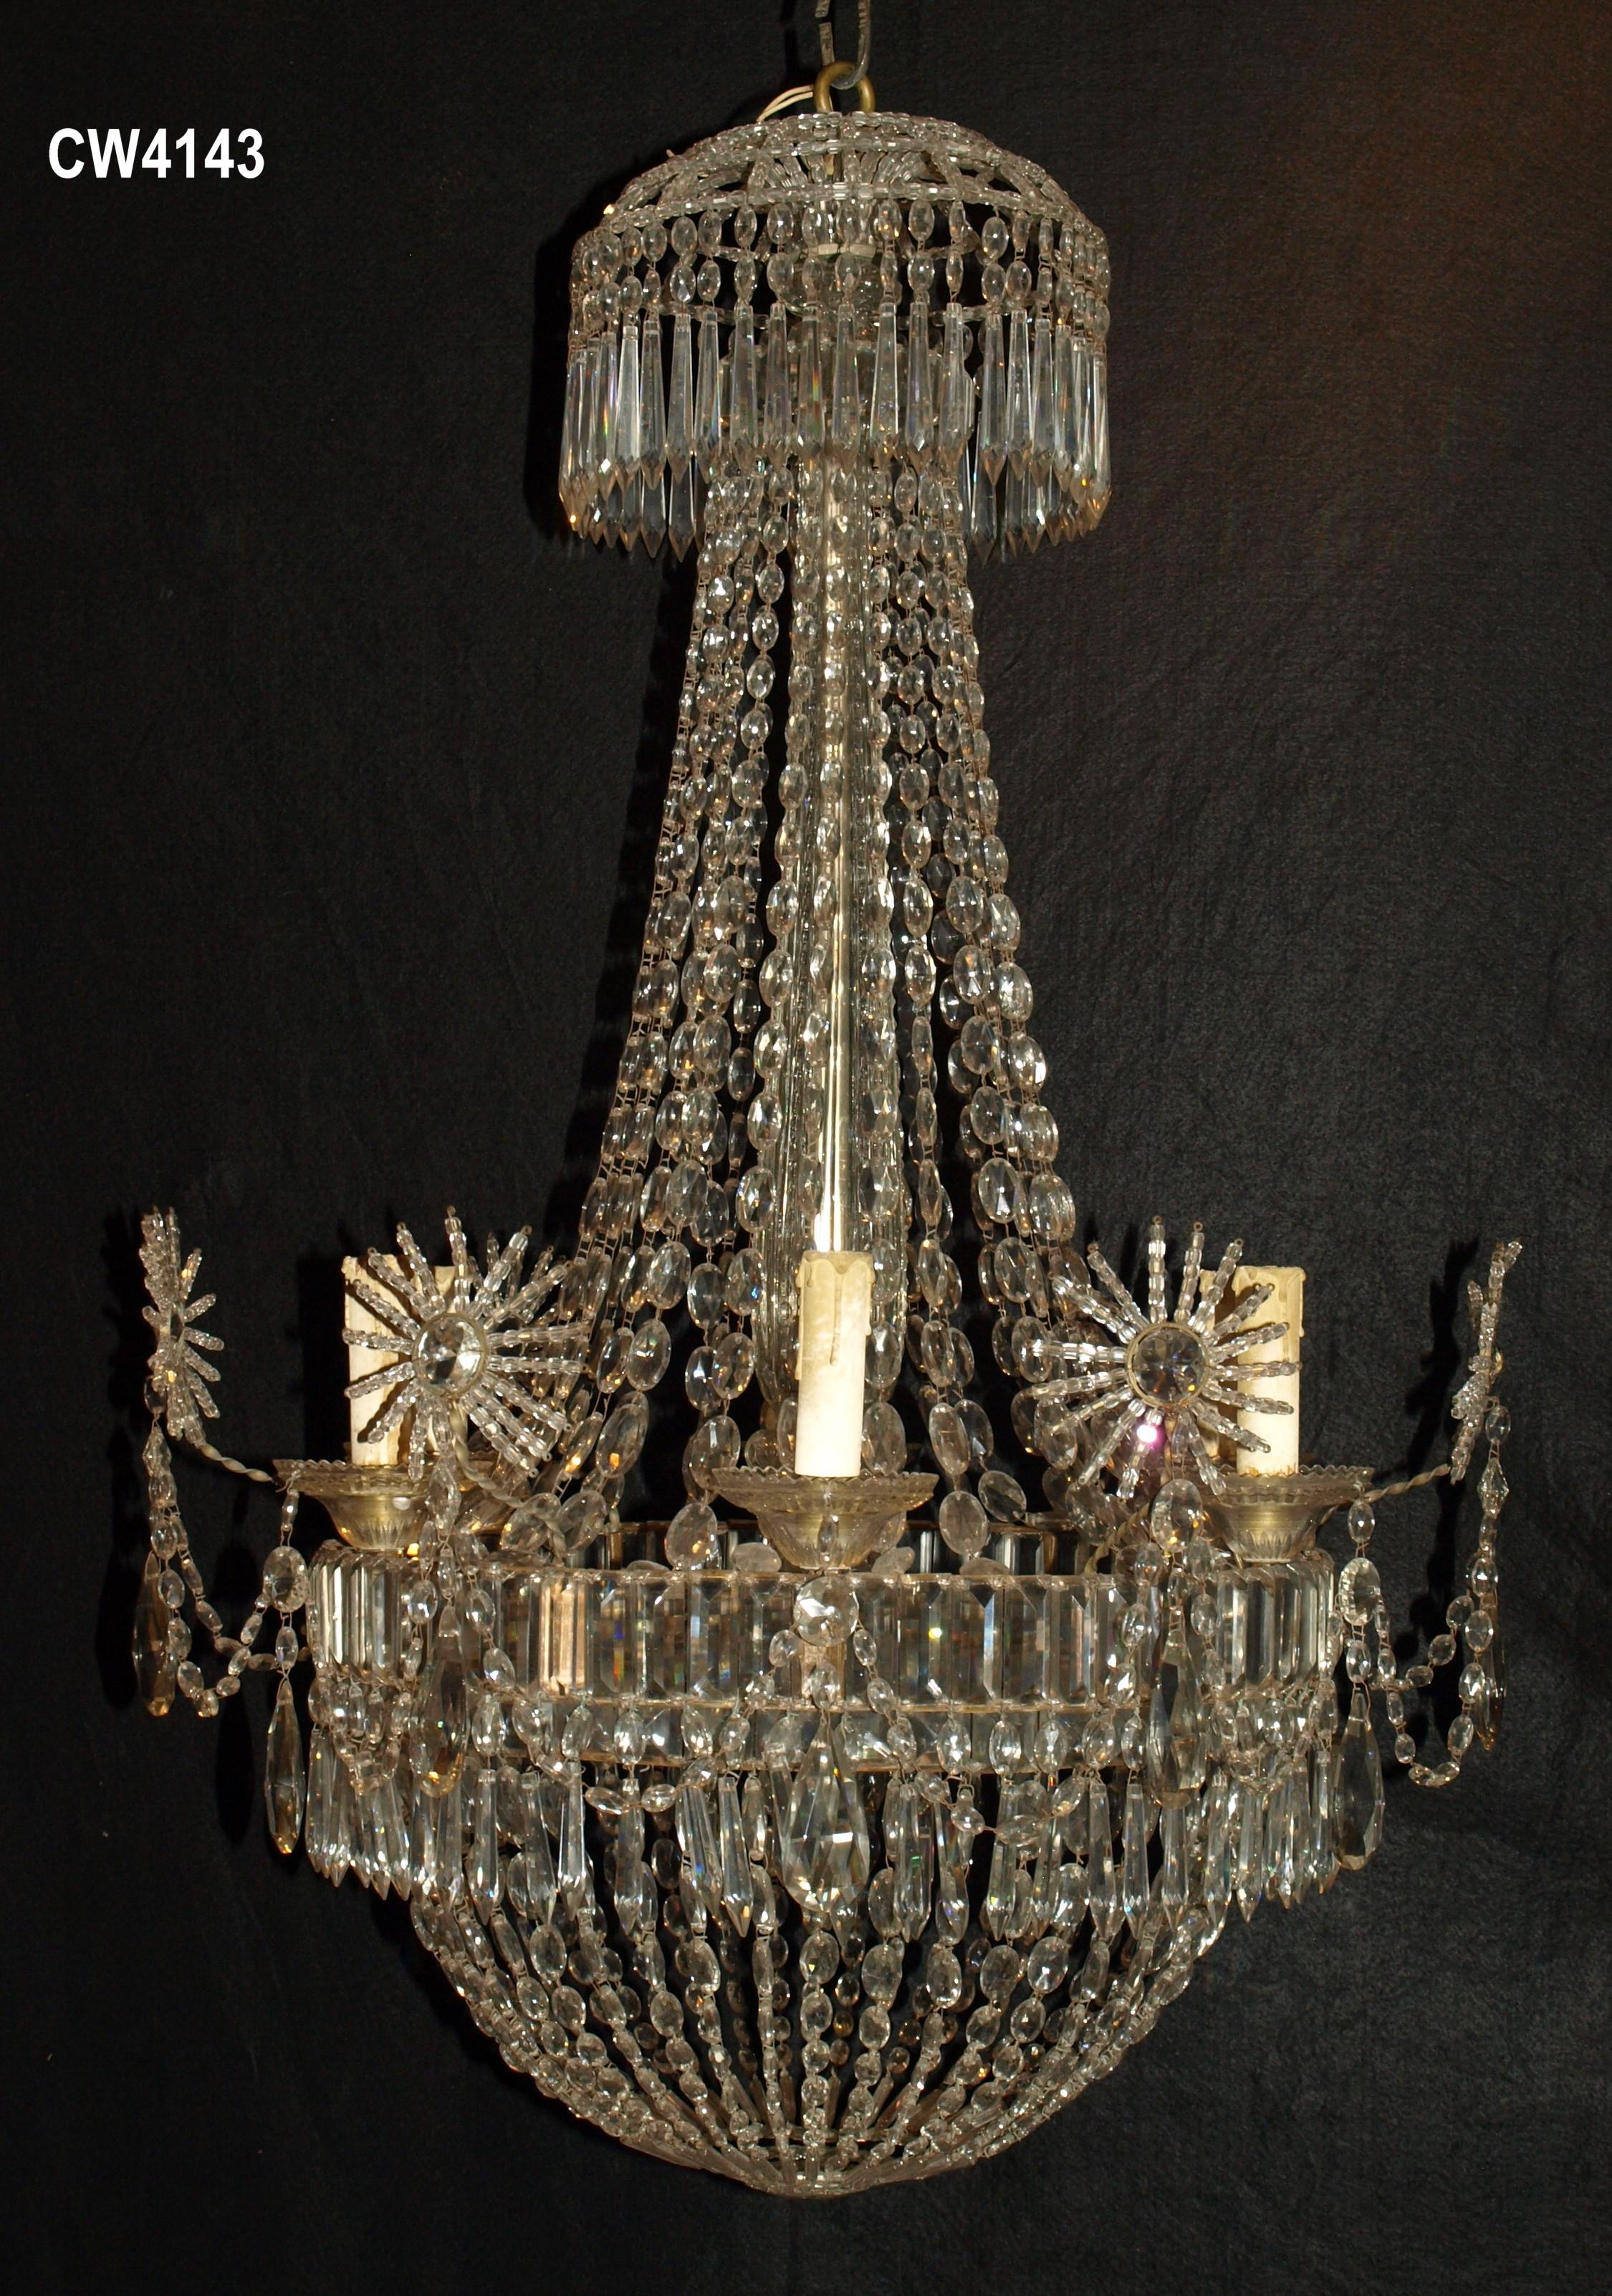 A very fine and delicate chandelier Maison Jansen. 6 lights. France, circa 1920
Dimensions: Height 38